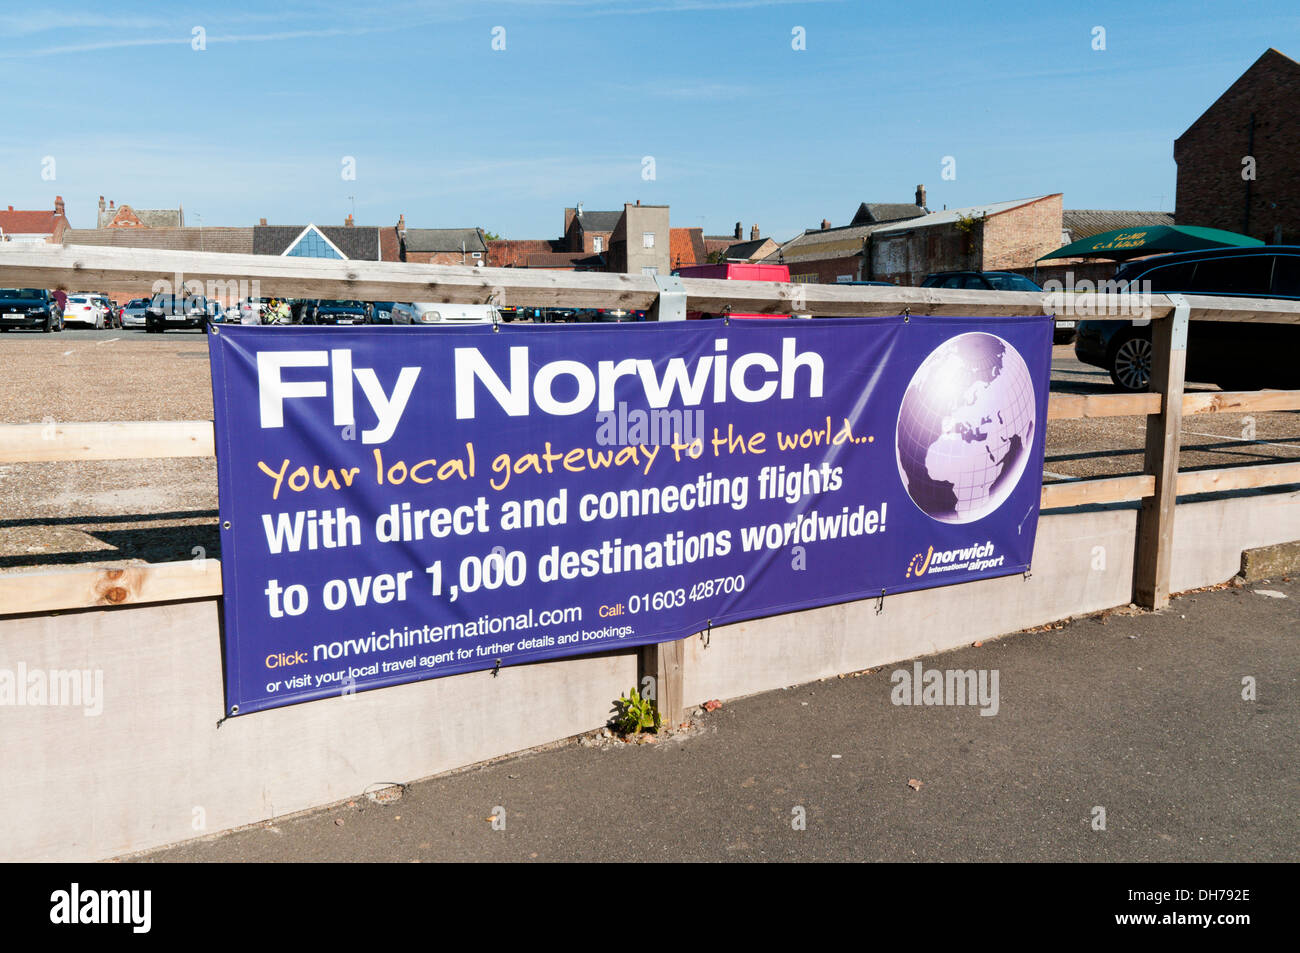 A banner advertisement encourages people to fly from the local airport at Norwich. Stock Photo